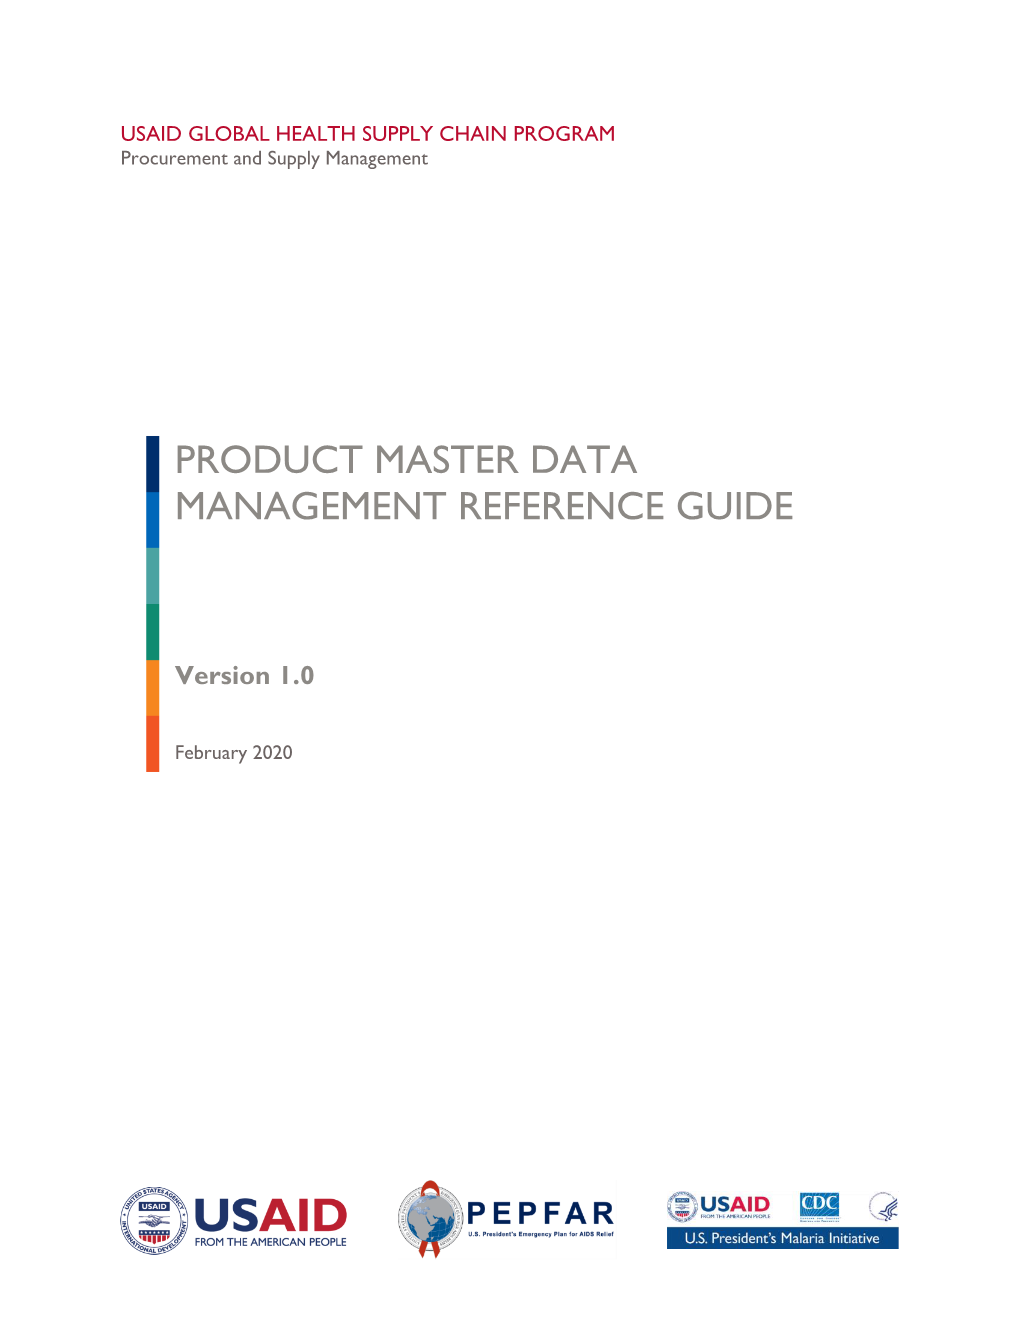 Product Master Data Management Reference Guide